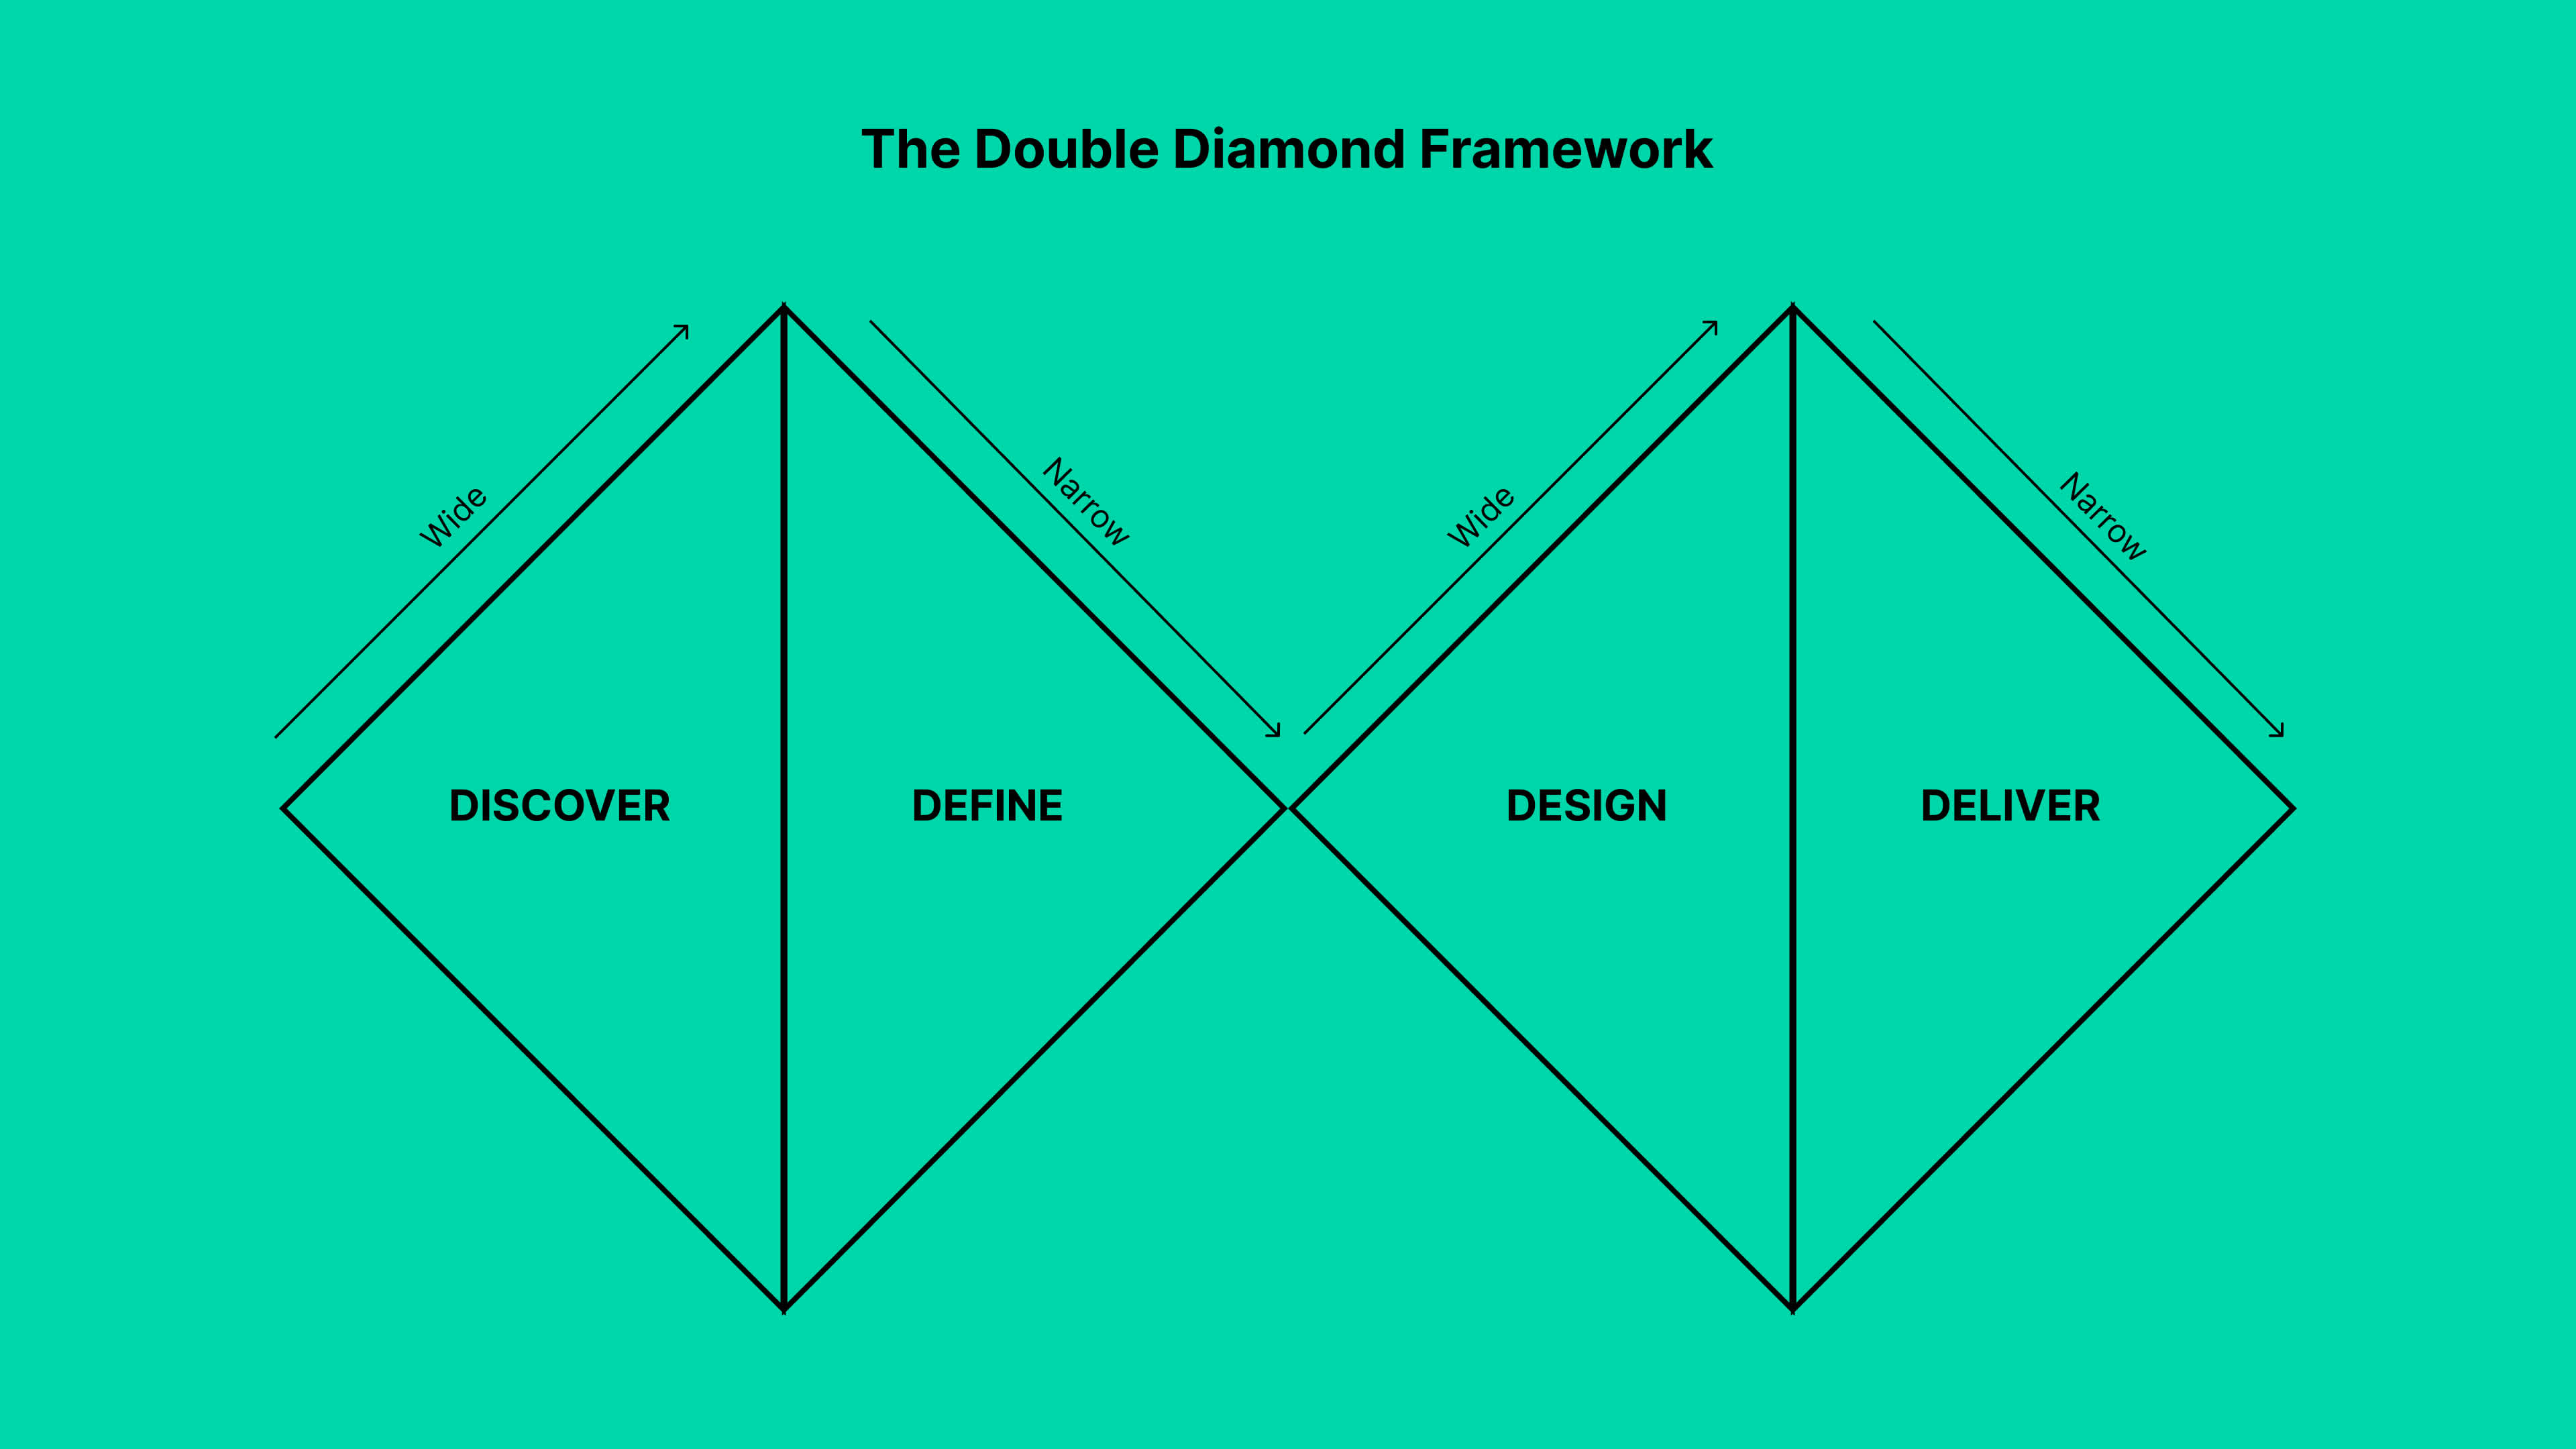 An image depicting the Double Diamond methodology framework, consisting of two diamond shapes intersecting at their centres. 